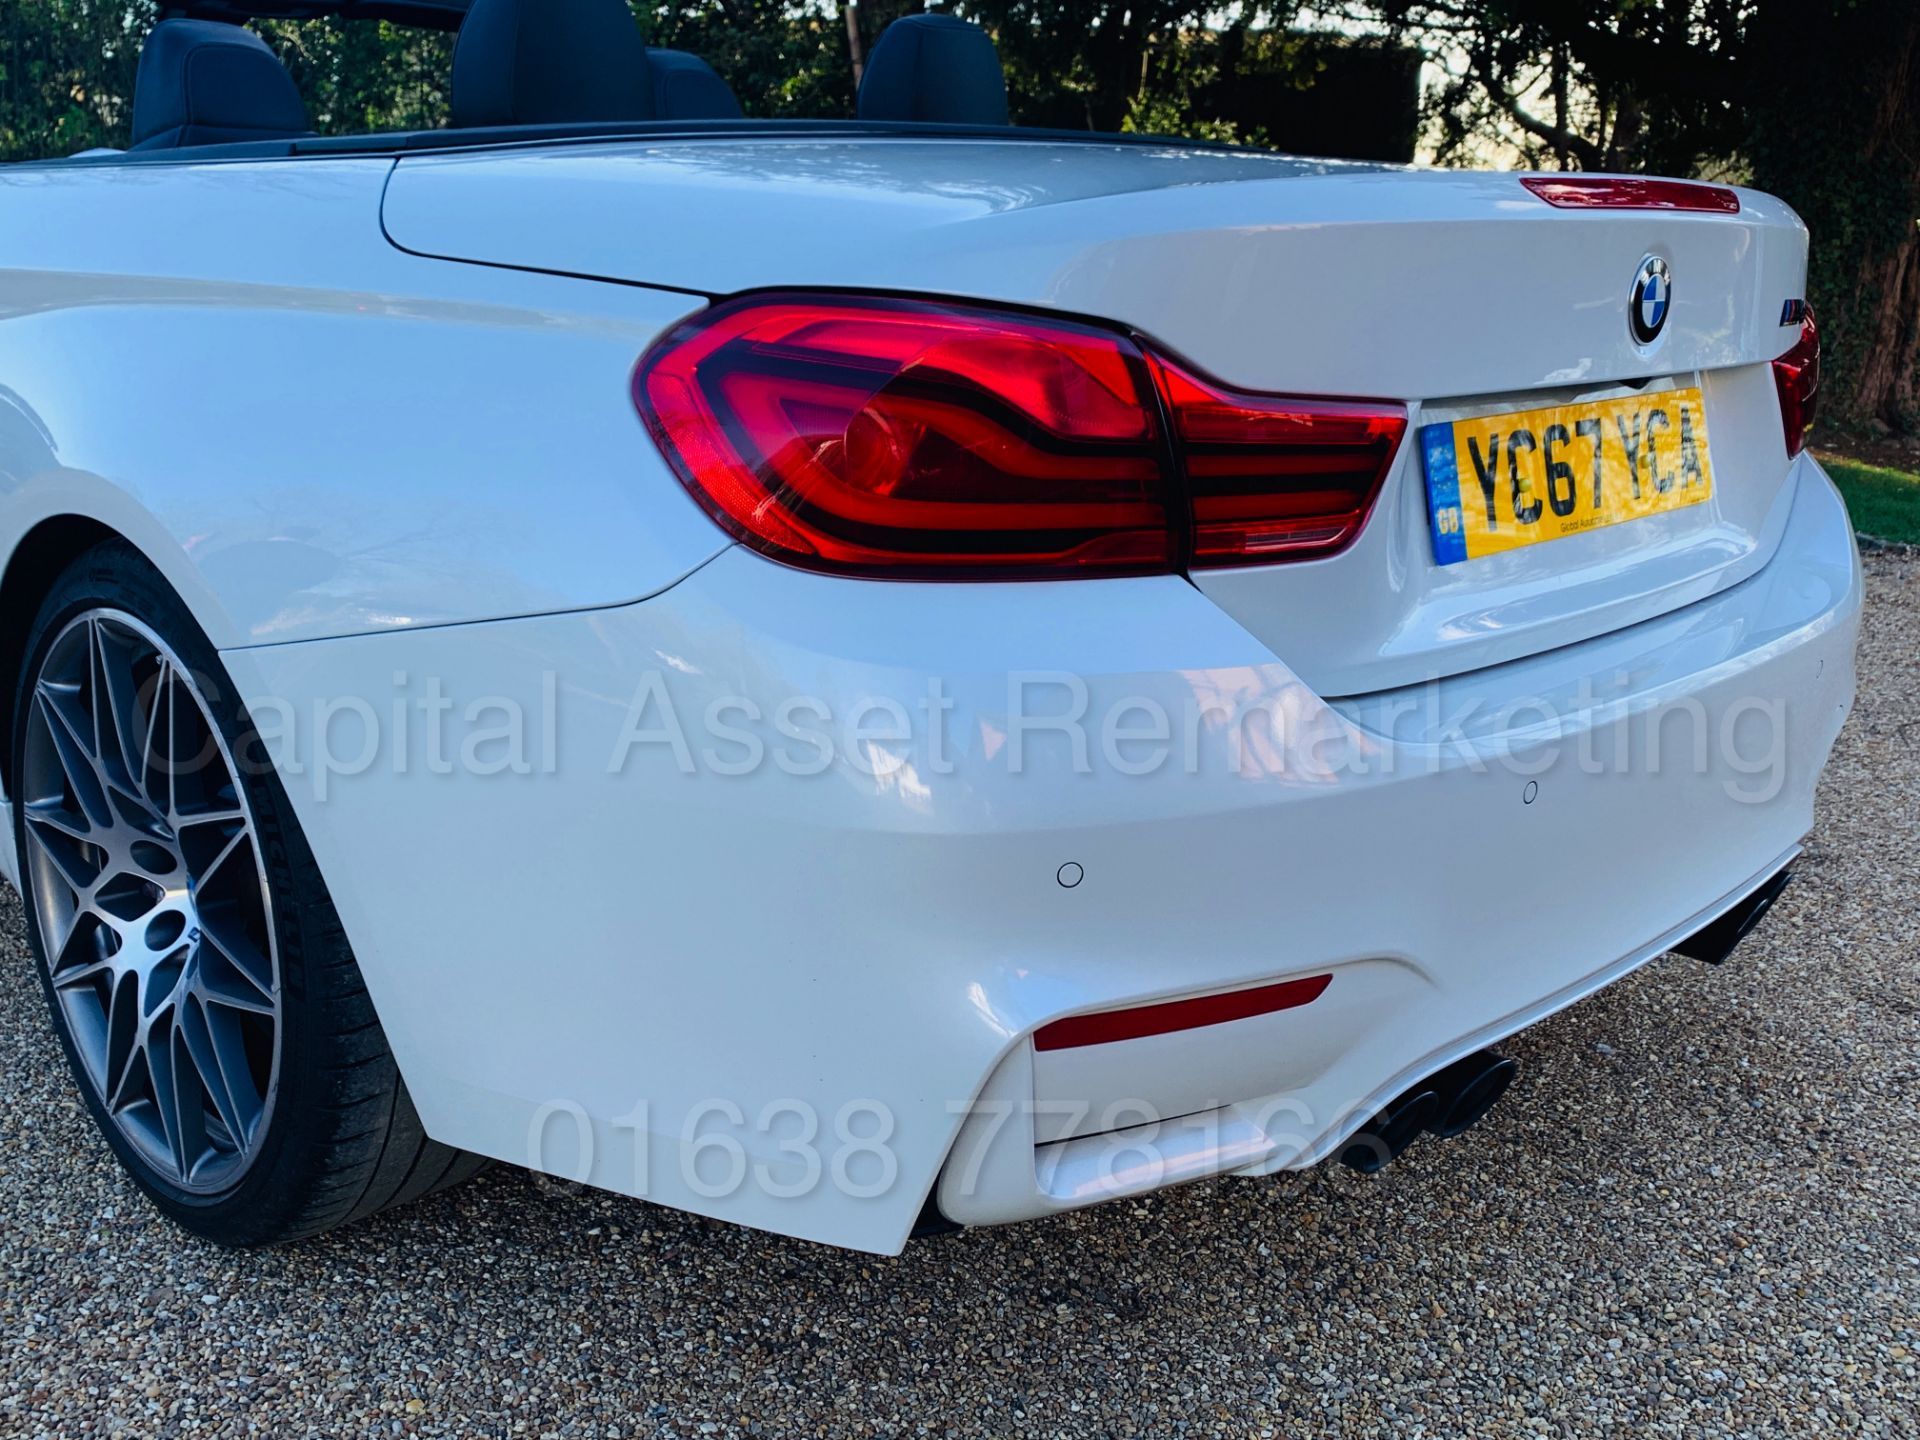 ON SALE BMW M4 CONVERTIBLE *COMPETITION PACKAGE* (2018 MODEL) '431 BHP - M DCT AUTO' WOW!!!!! - Image 37 of 89